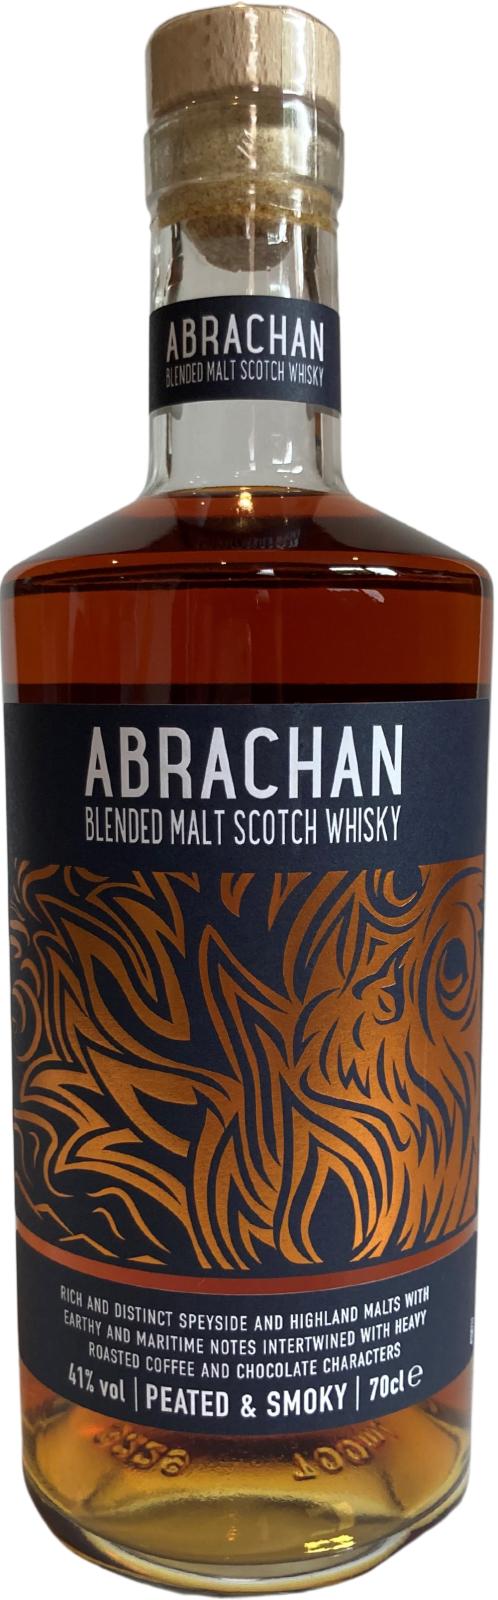 Abrachan Cd Ratings & Smoky reviews - and - Whiskybase Peated